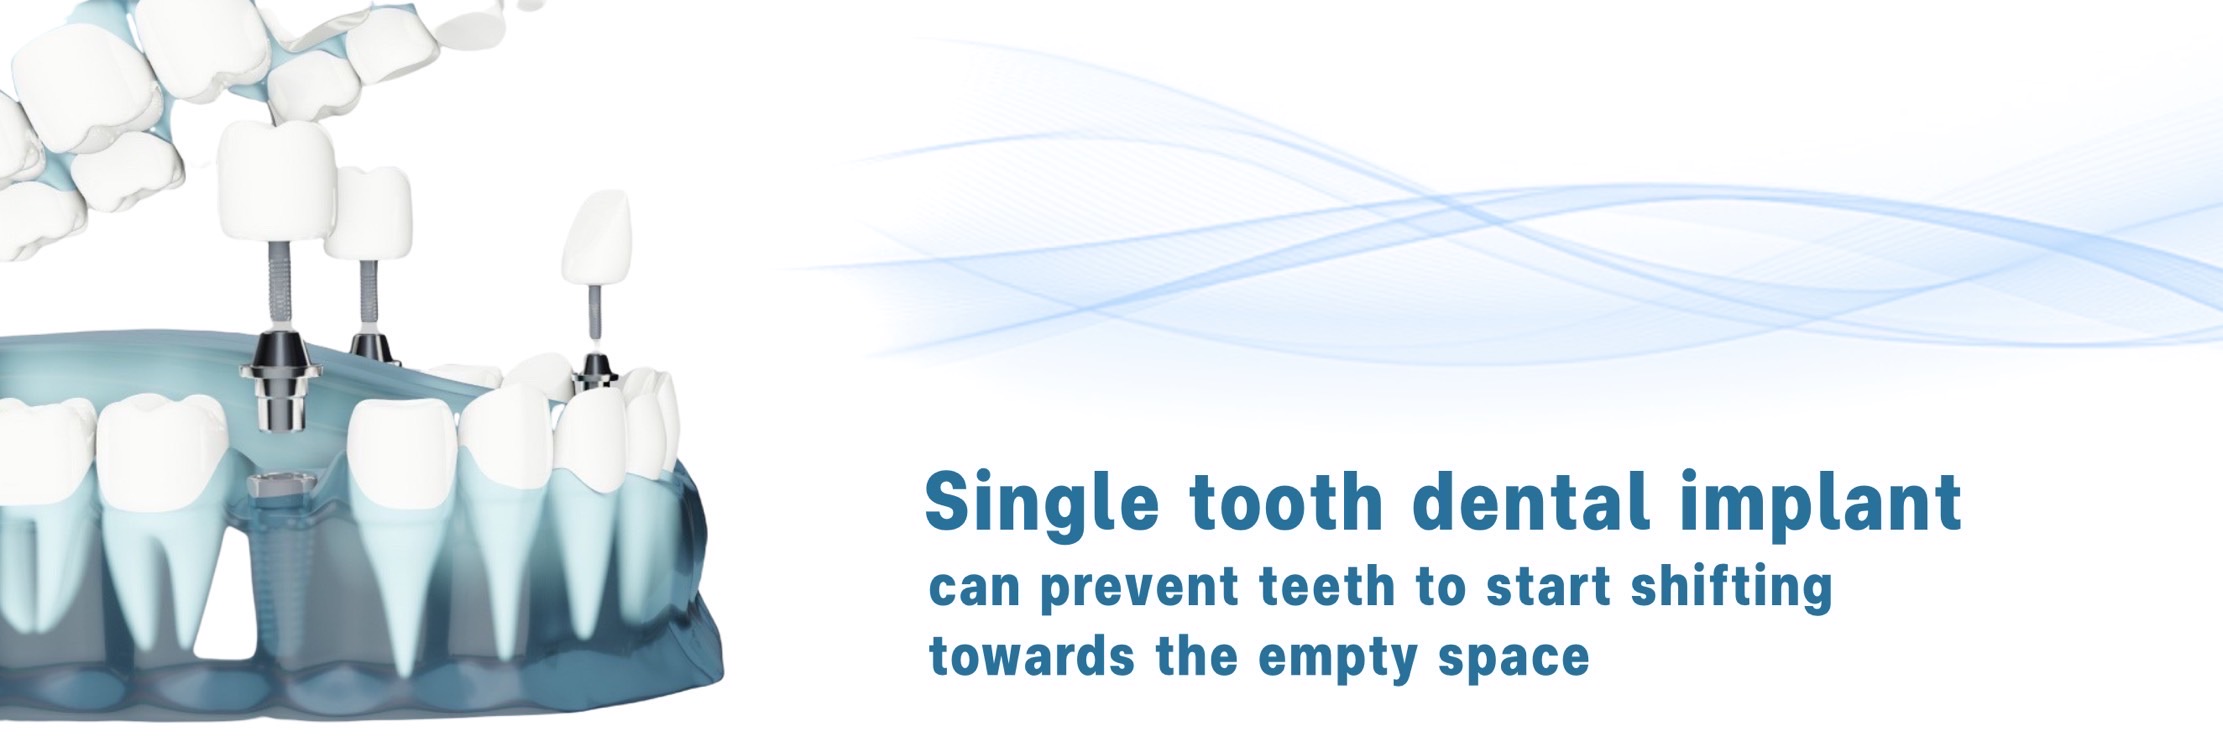 More about dental implants